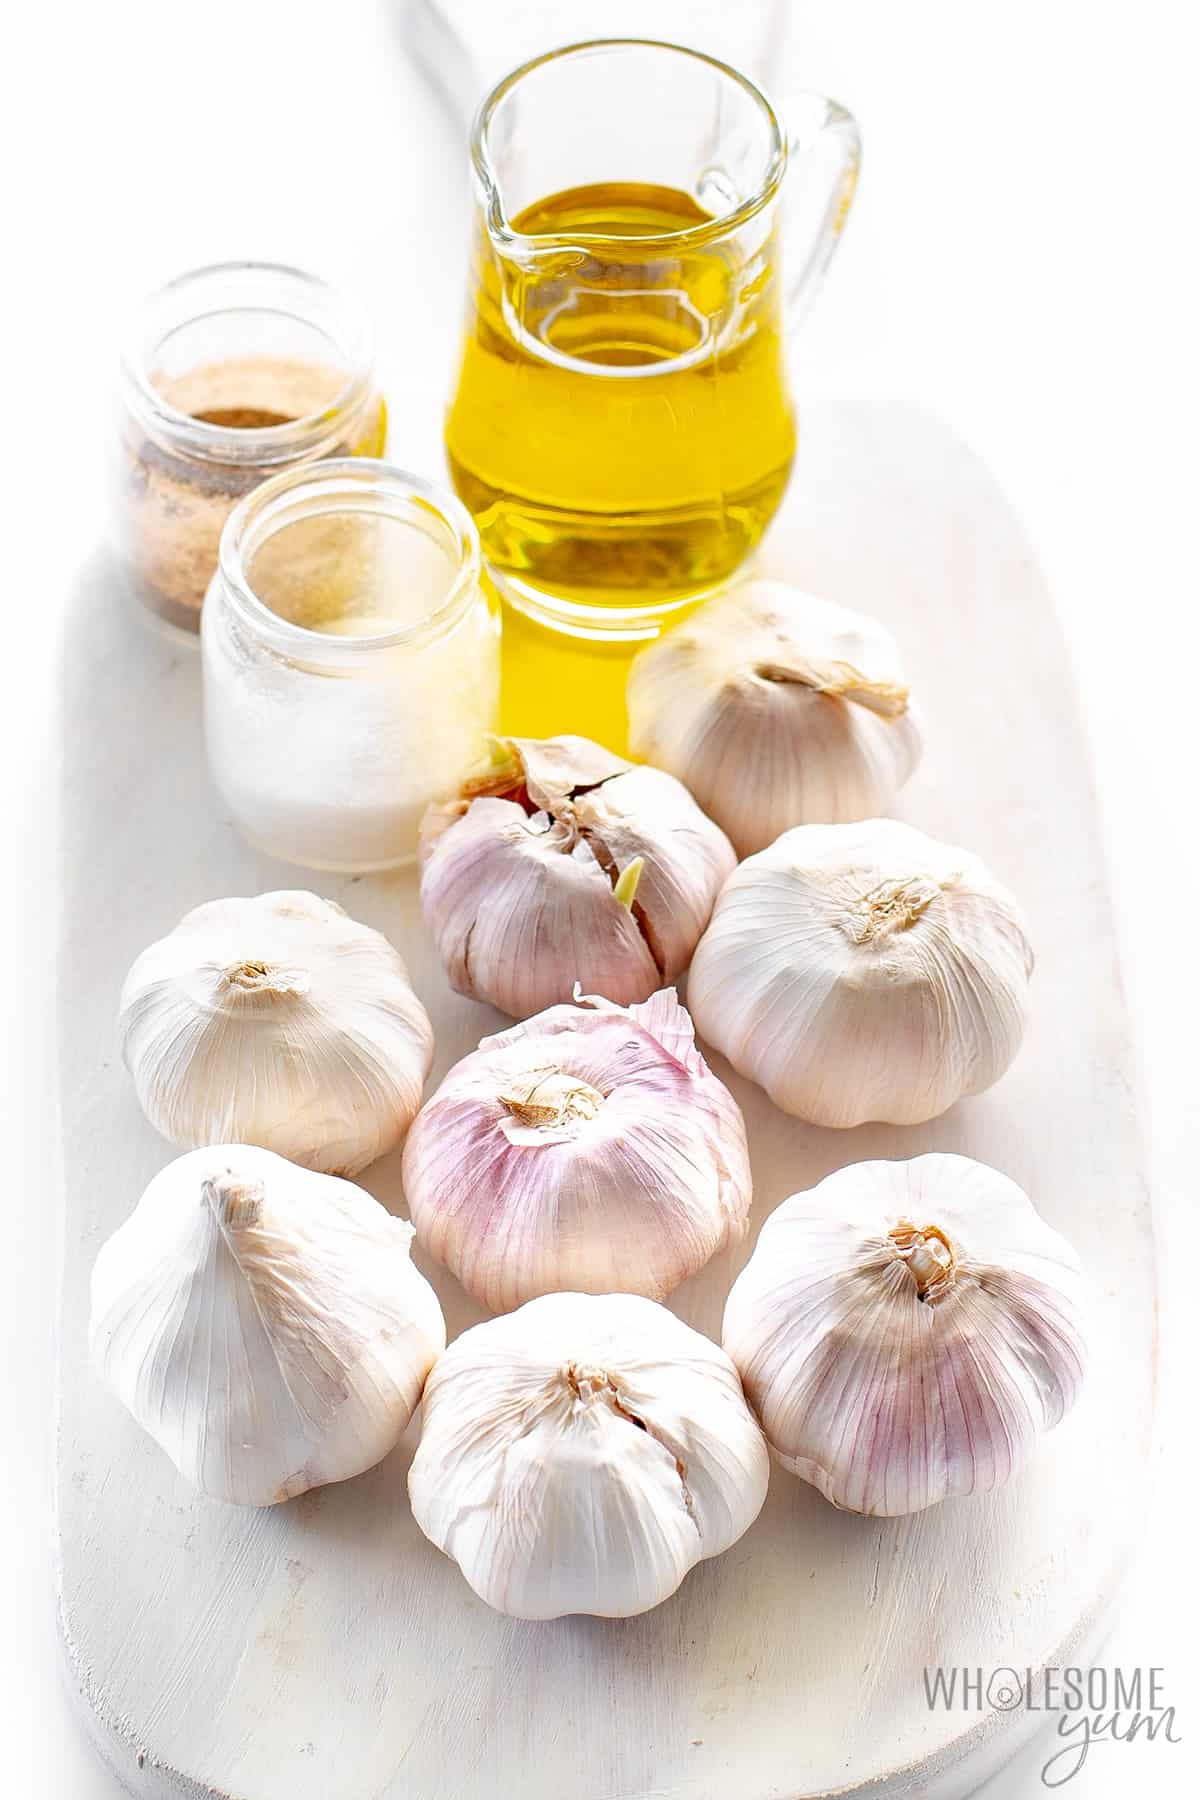 Ingredients for oven roasted garlic